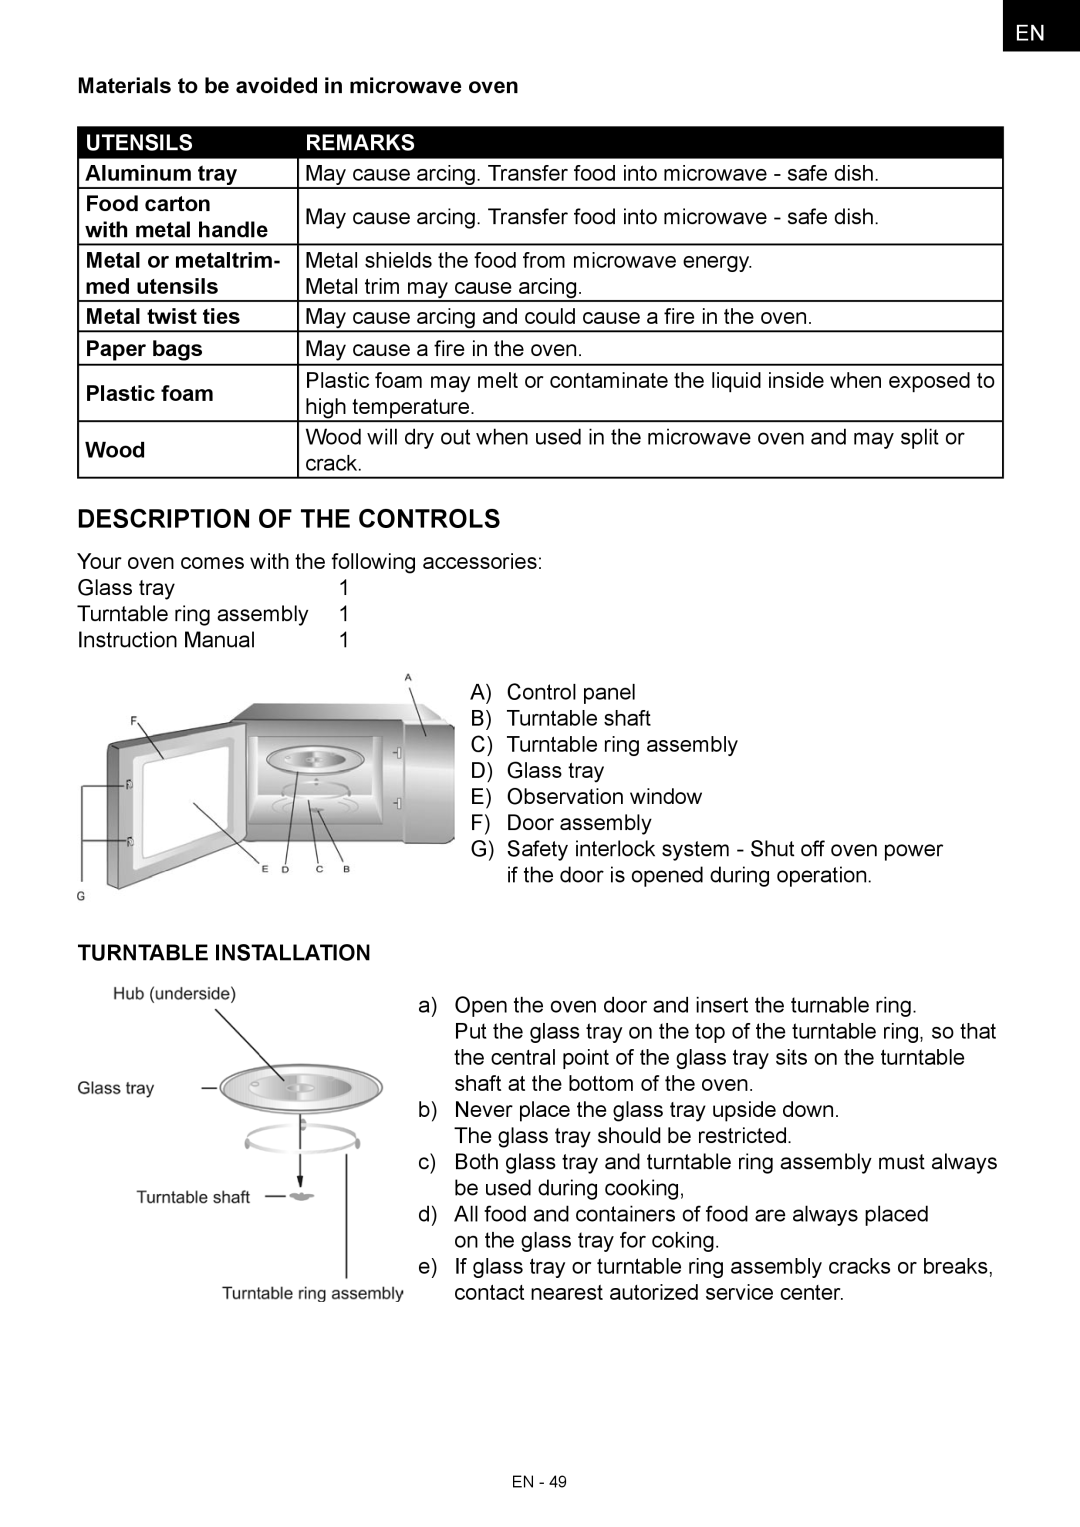 Hyundai MWEGH 281S Description of the controls, Materials to be avoided in microwave oven, Aluminum tray, Food carton 